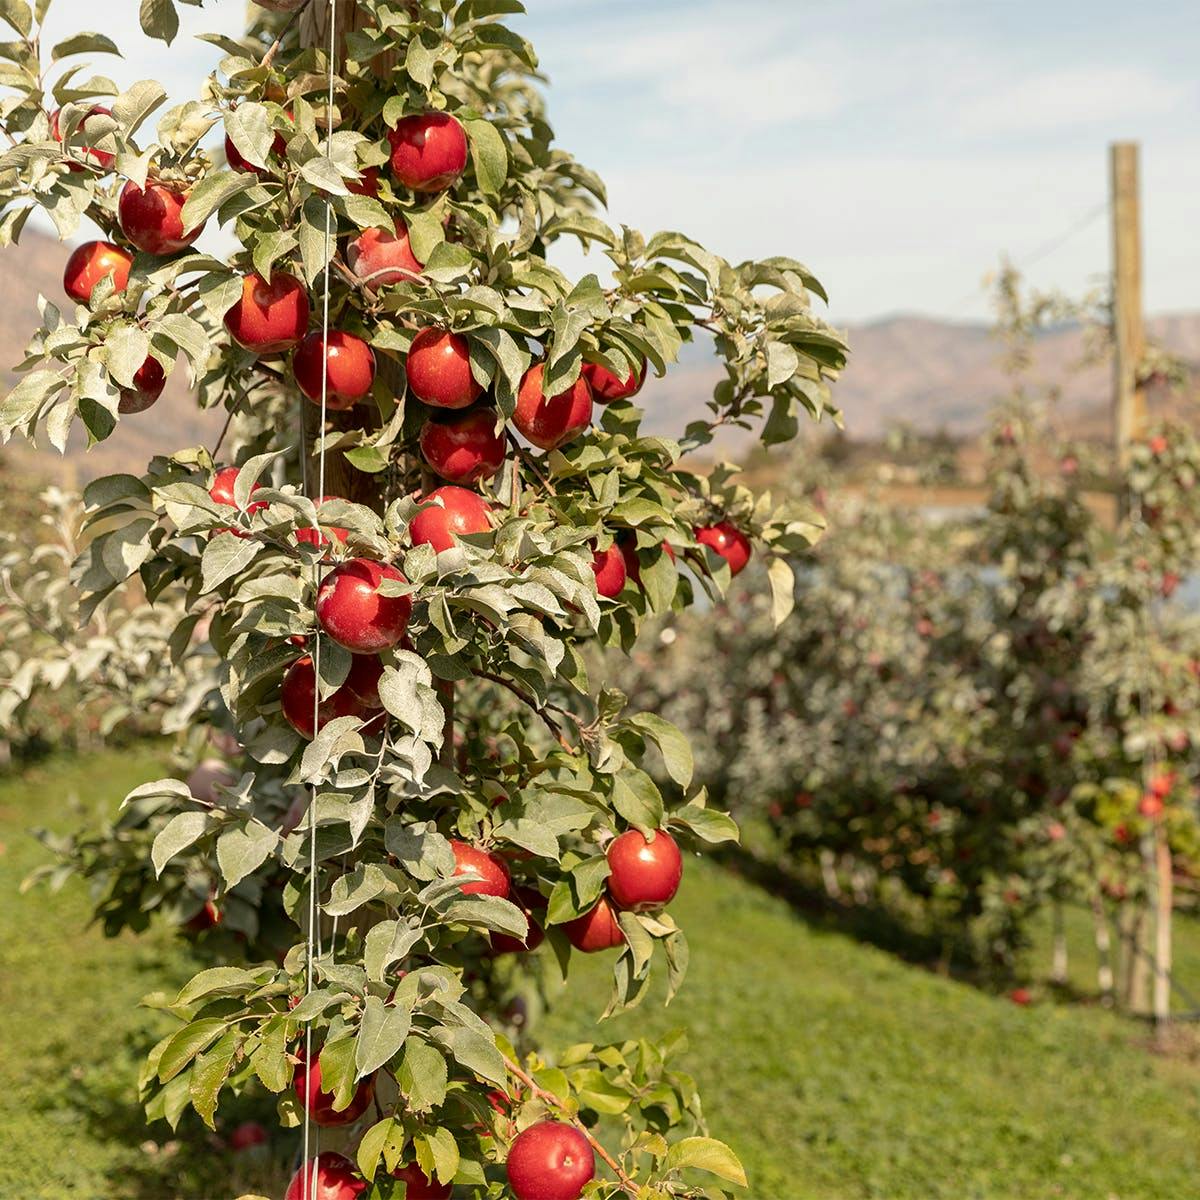 SugarBee™ Apple - Dozen Chelan Fresh Farms97% love this shop97% of  customers love this!The Customer Love Score represents the percentage of  customers